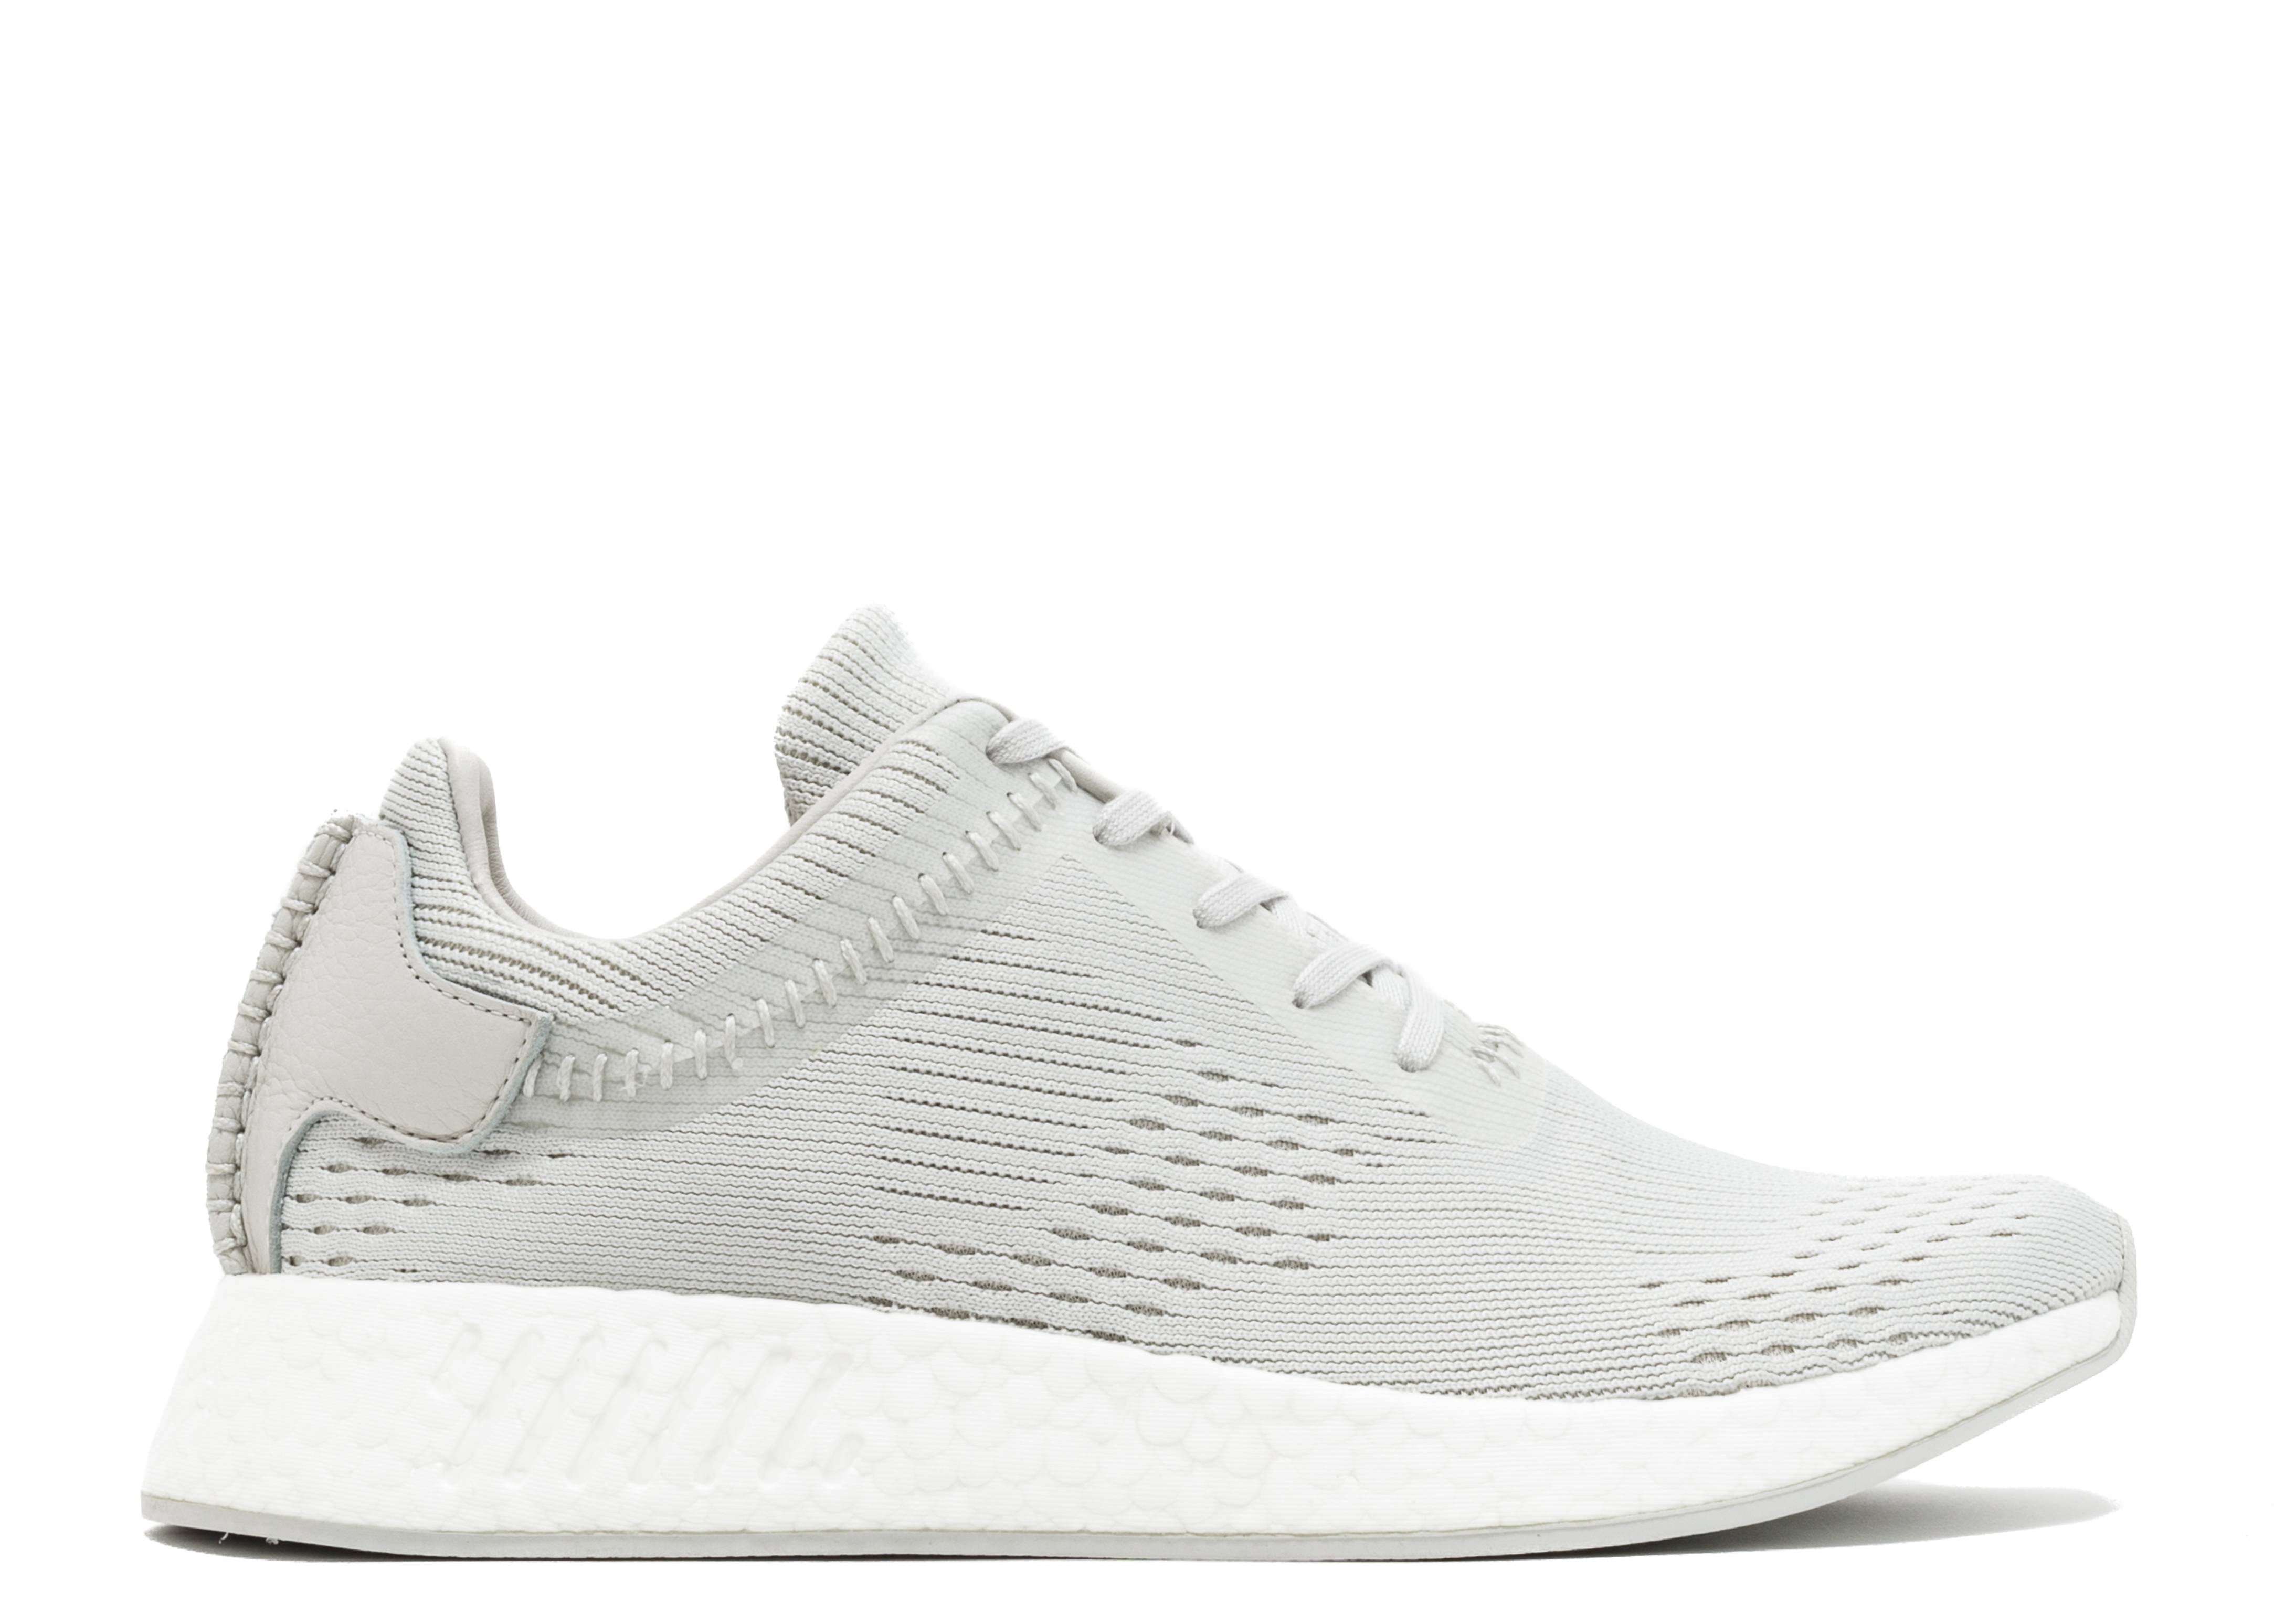 wings+horns x NMD_R2 'Hint'